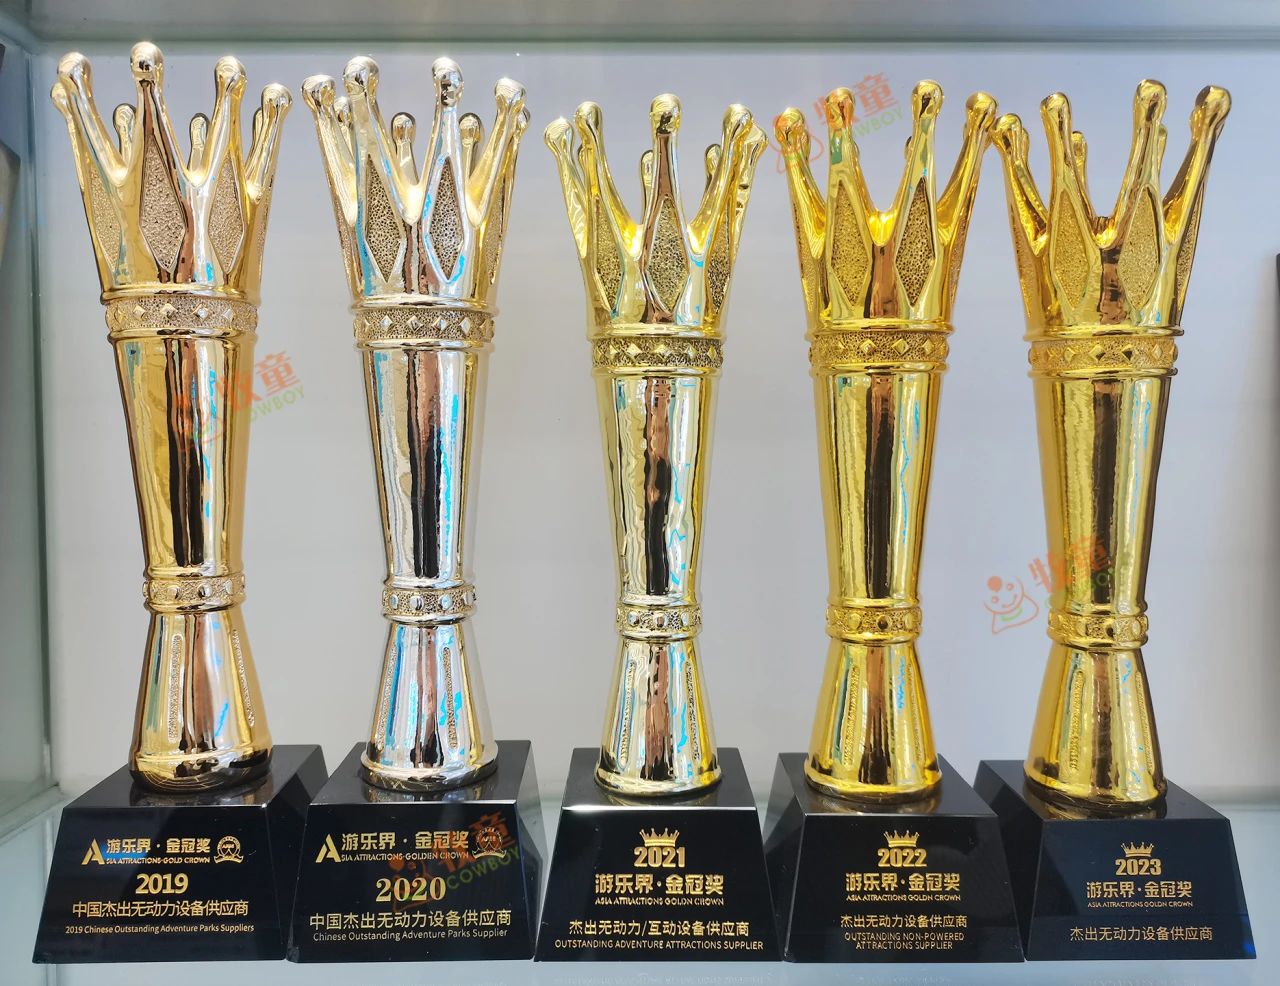 Good News! Cowboy Group Wins Golden Crown Award for Five Consecutive Years